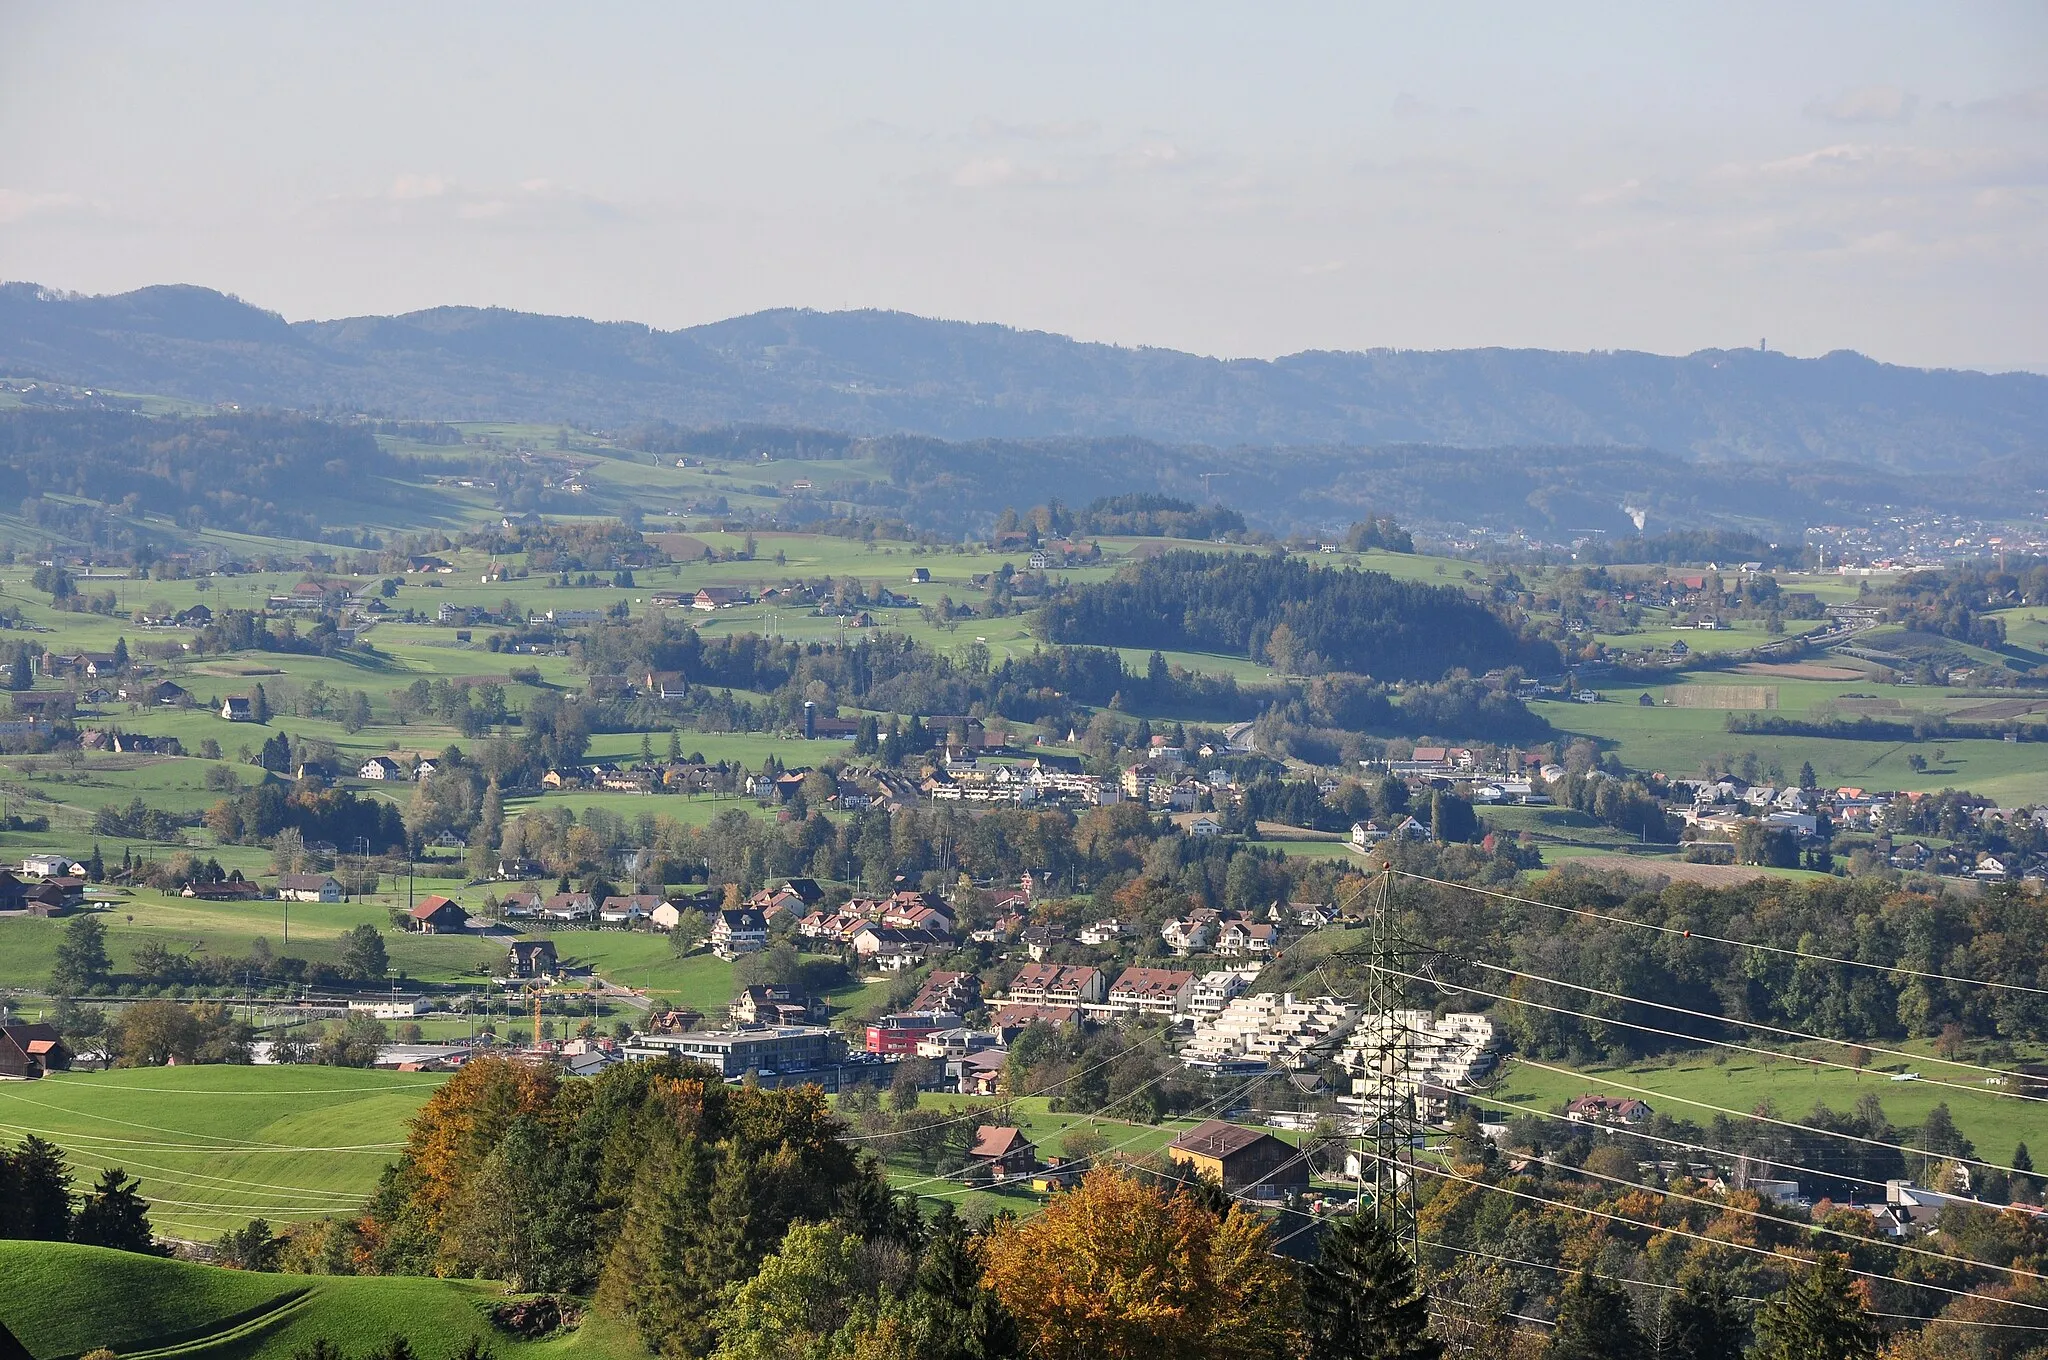 Photo showing: Samstagern and Wollerau (separated by the highway) on Zimmerberg plateau, as seen from Feusisberg (Switzerland) towards Etzel mountain, (from the left:) Albis chain with Felsenegg and Sihltal valley in the background.